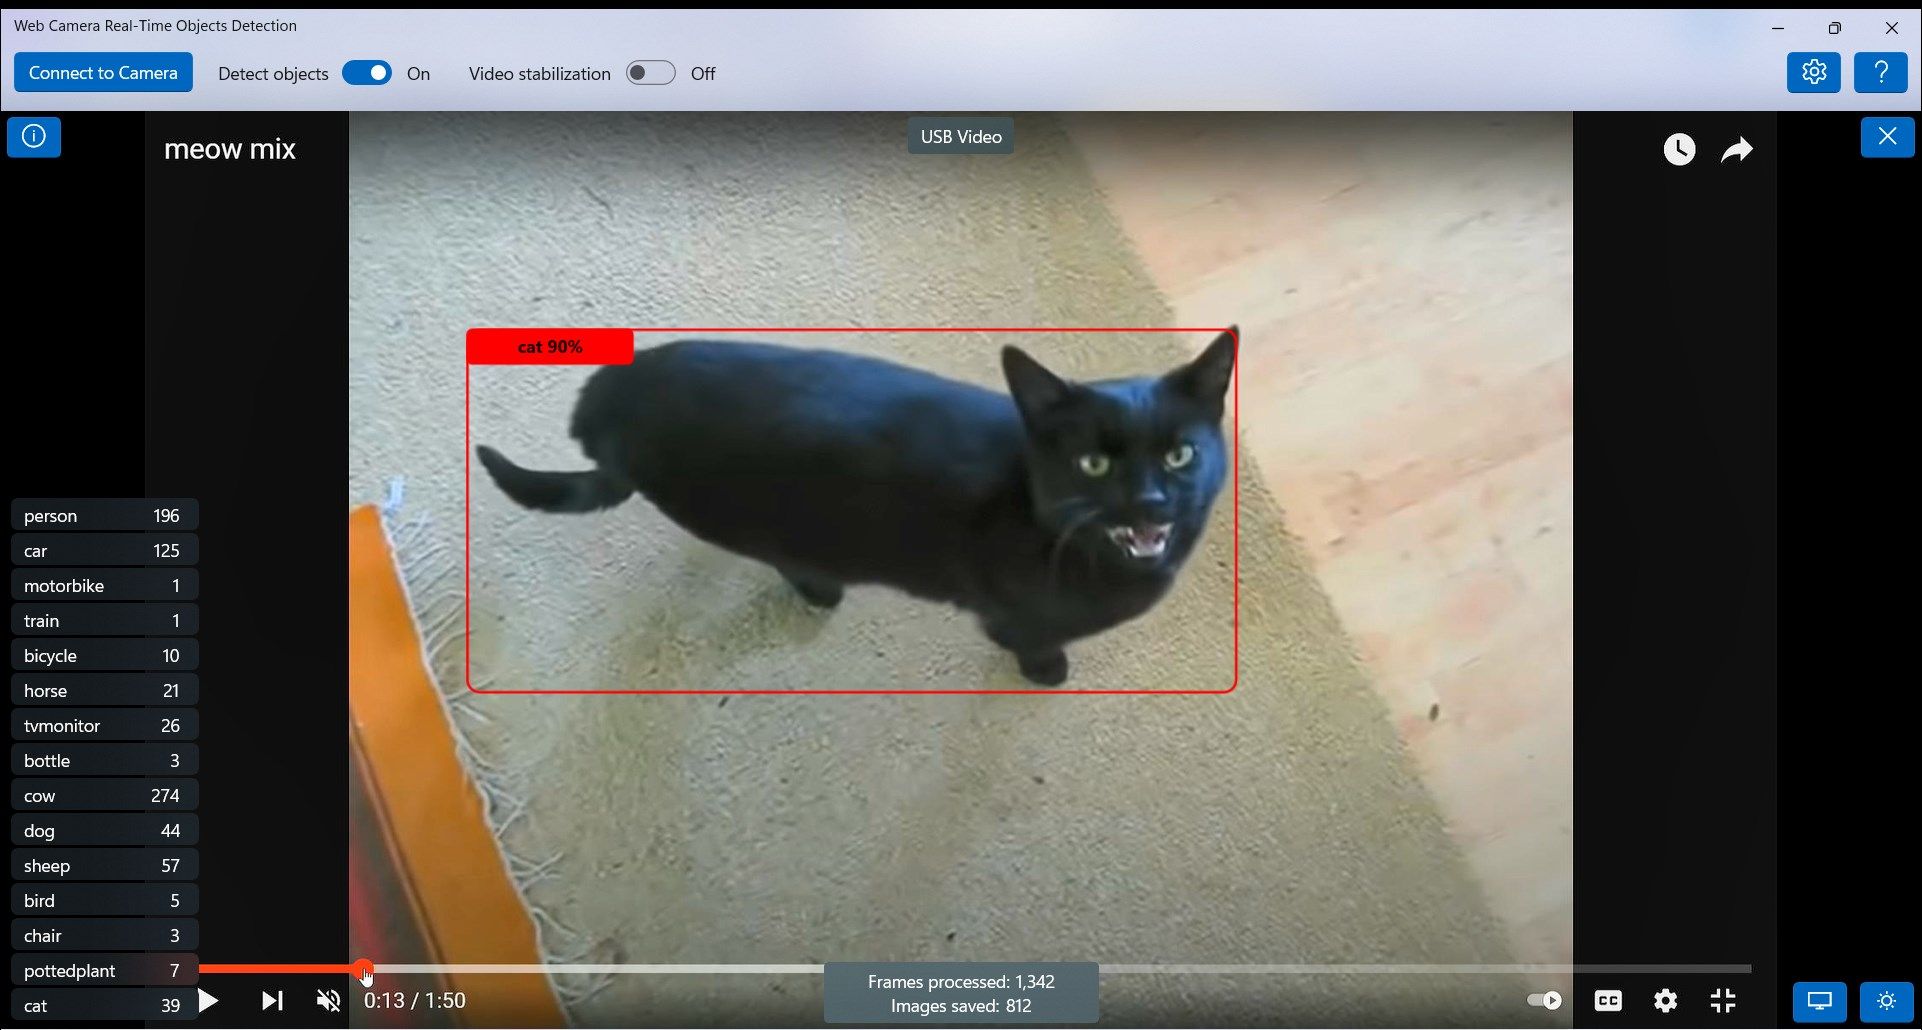 Web Camera Real-Time Objects Detection